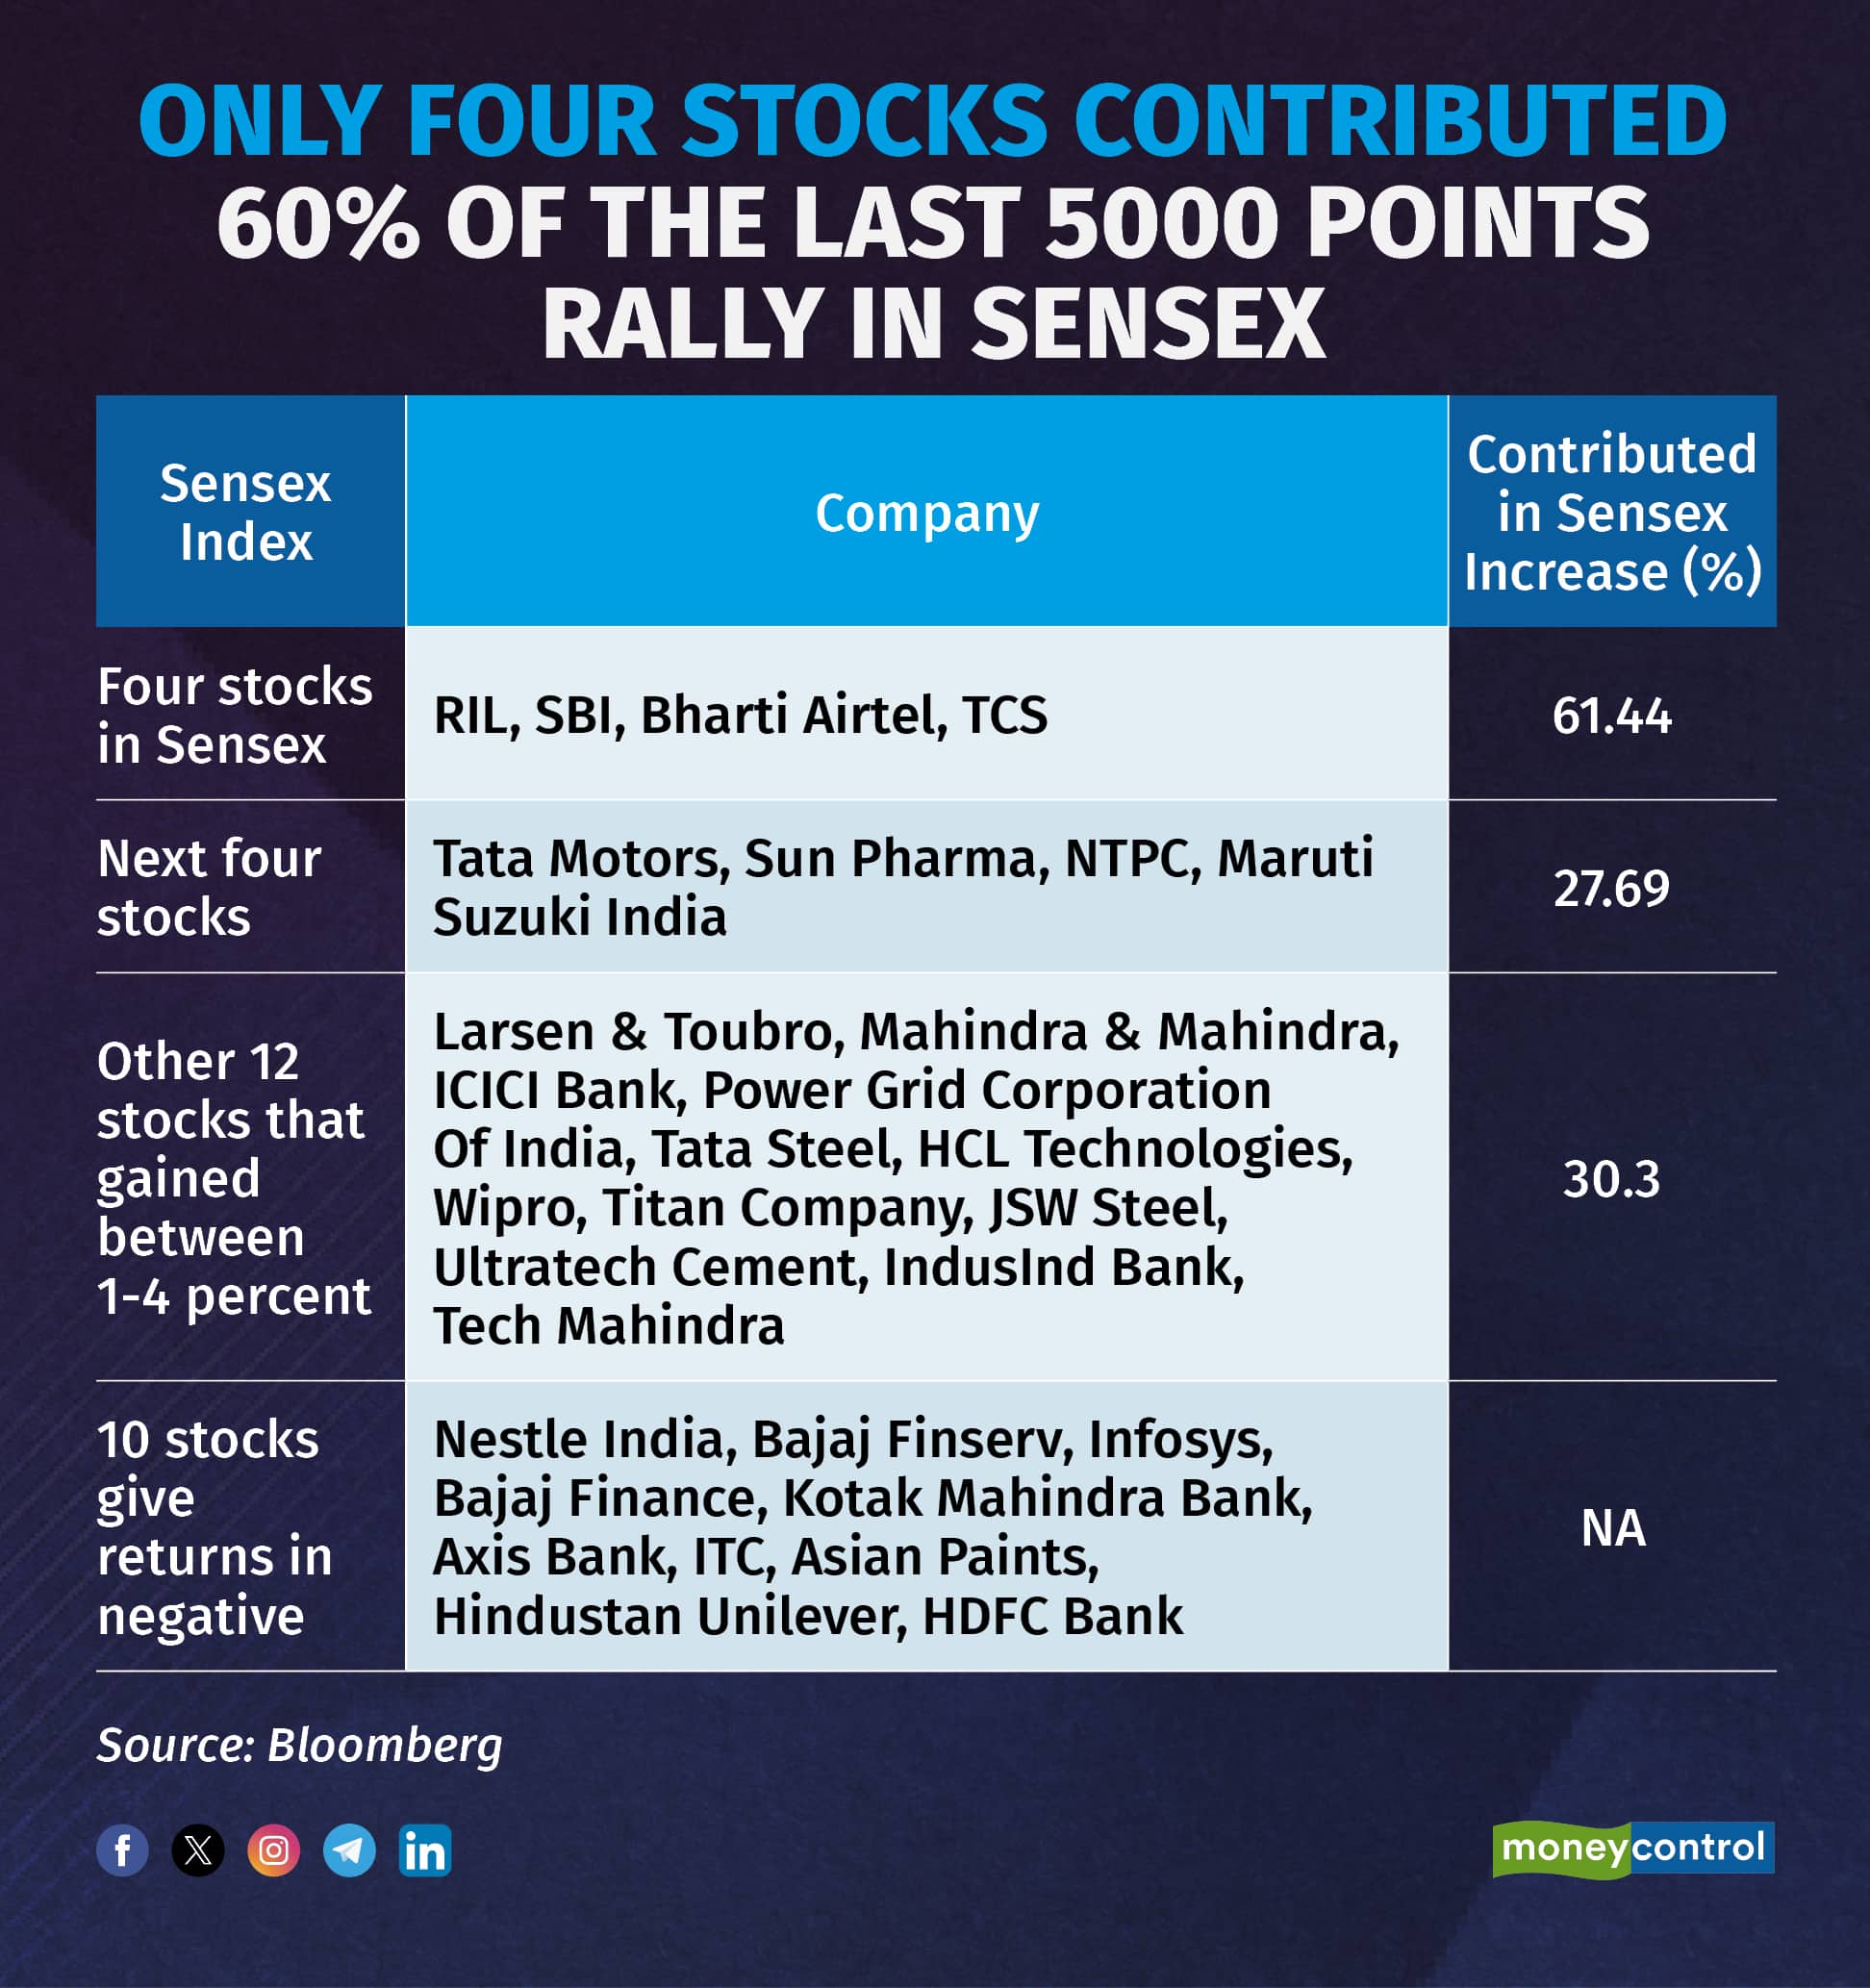 Only four stocks contributed 60% of the last 5000 points rally in Sensex